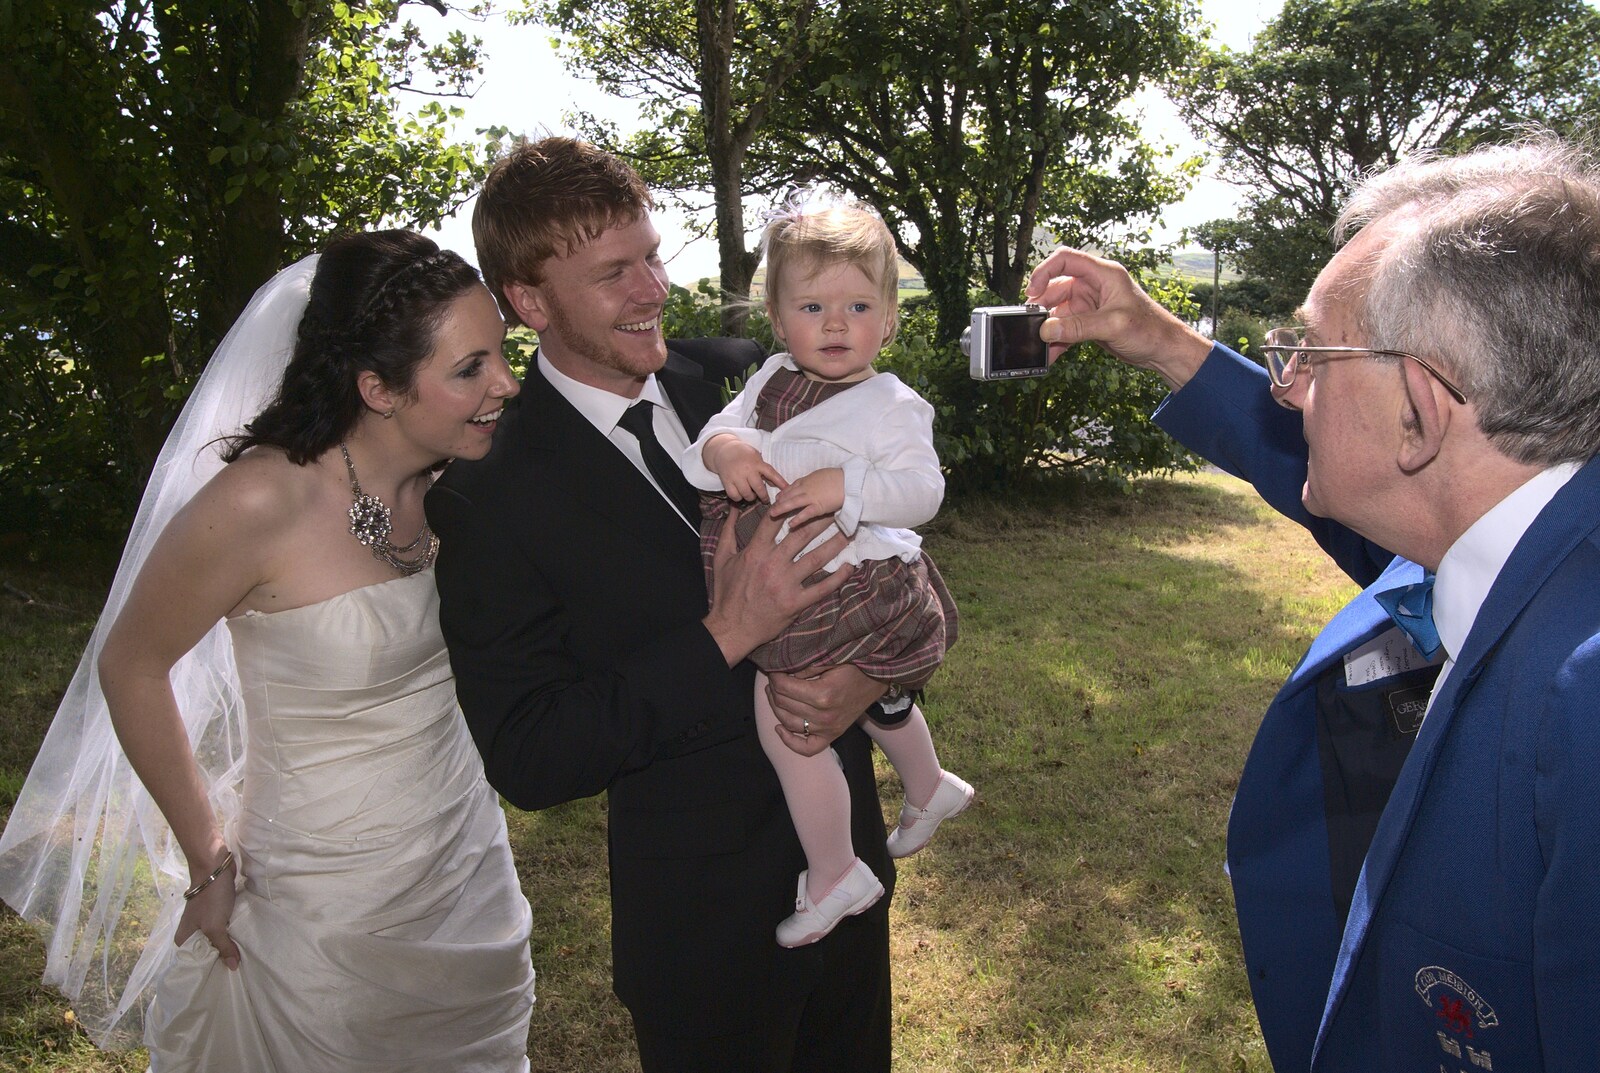 Compact camera action from Julie and Cameron's Wedding, Ballintaggart House, Dingle - 24th July 2009